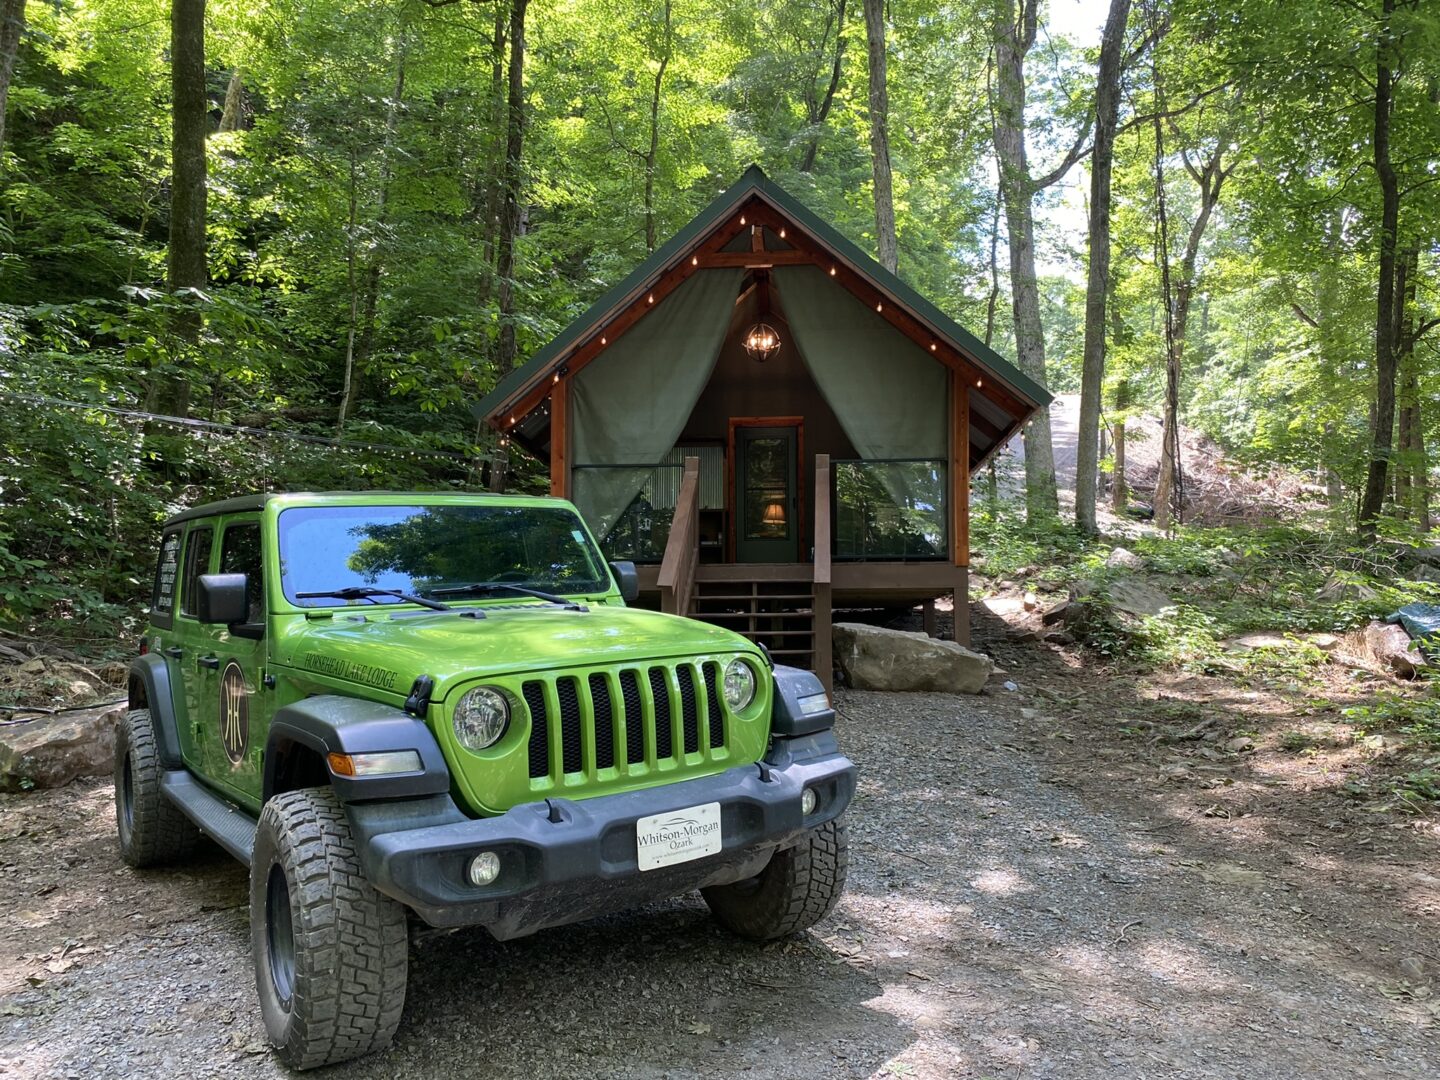 A green jeep parked in front of a tent.